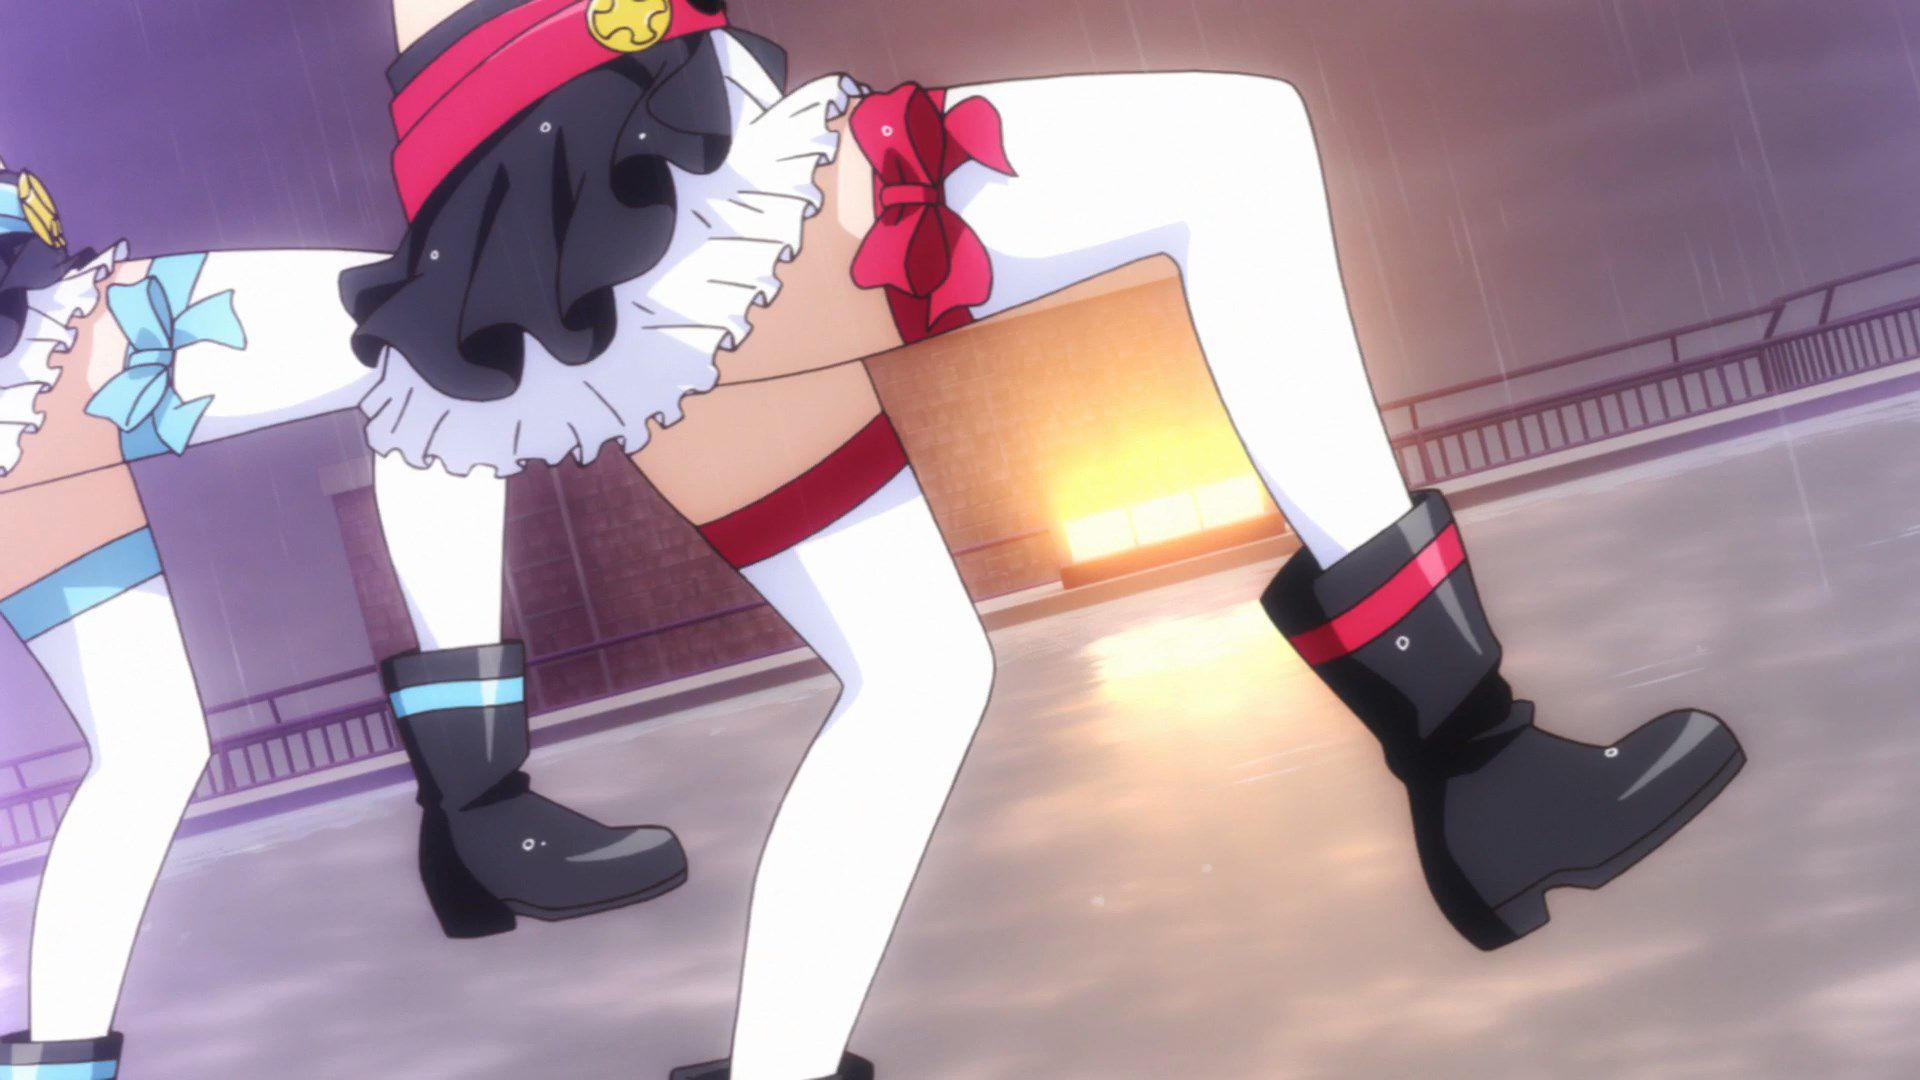 [God images] "love live! ' Μm ' PV's leg is too erotic everyone wakes up to a leg fetish of wwwww 45